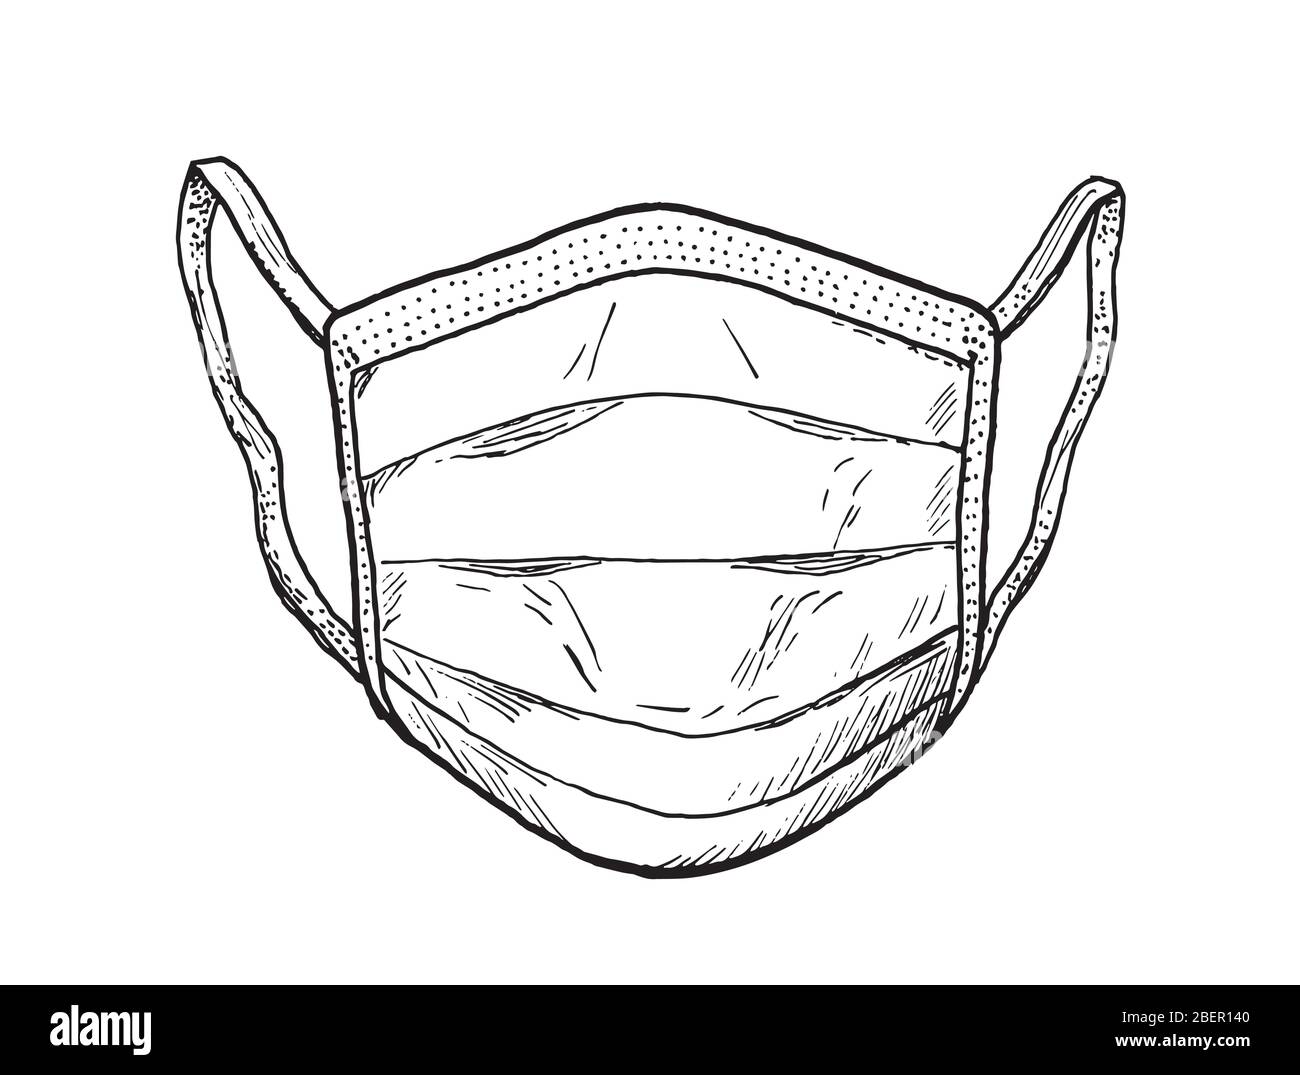 38800 Mask Drawing Stock Photos Pictures  RoyaltyFree Images  iStock   Surgical mask drawing People mask drawing Medical mask drawing